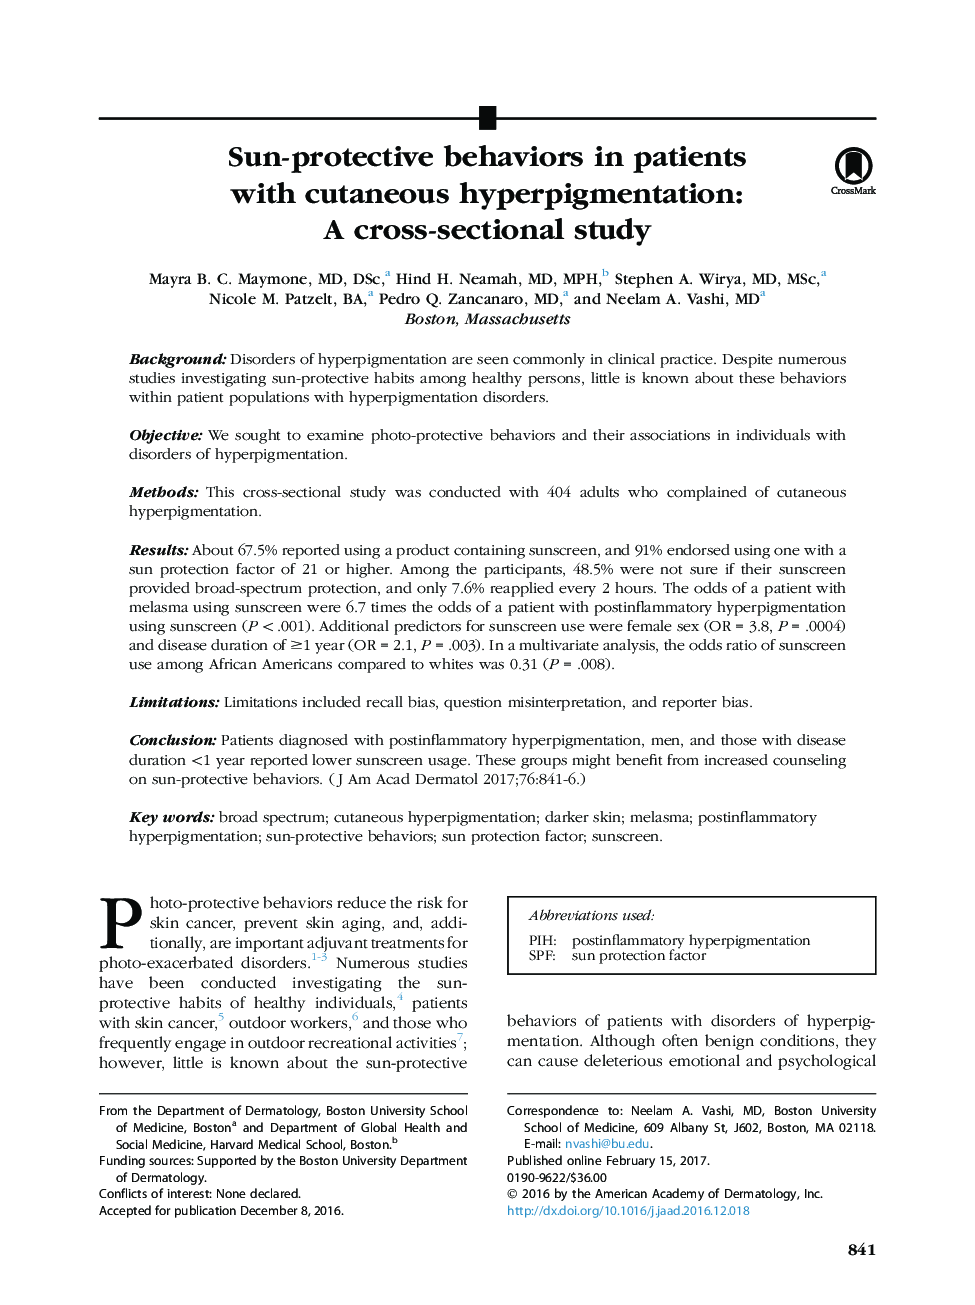 Sun-protective behaviors in patients with cutaneous hyperpigmentation: A cross-sectional study